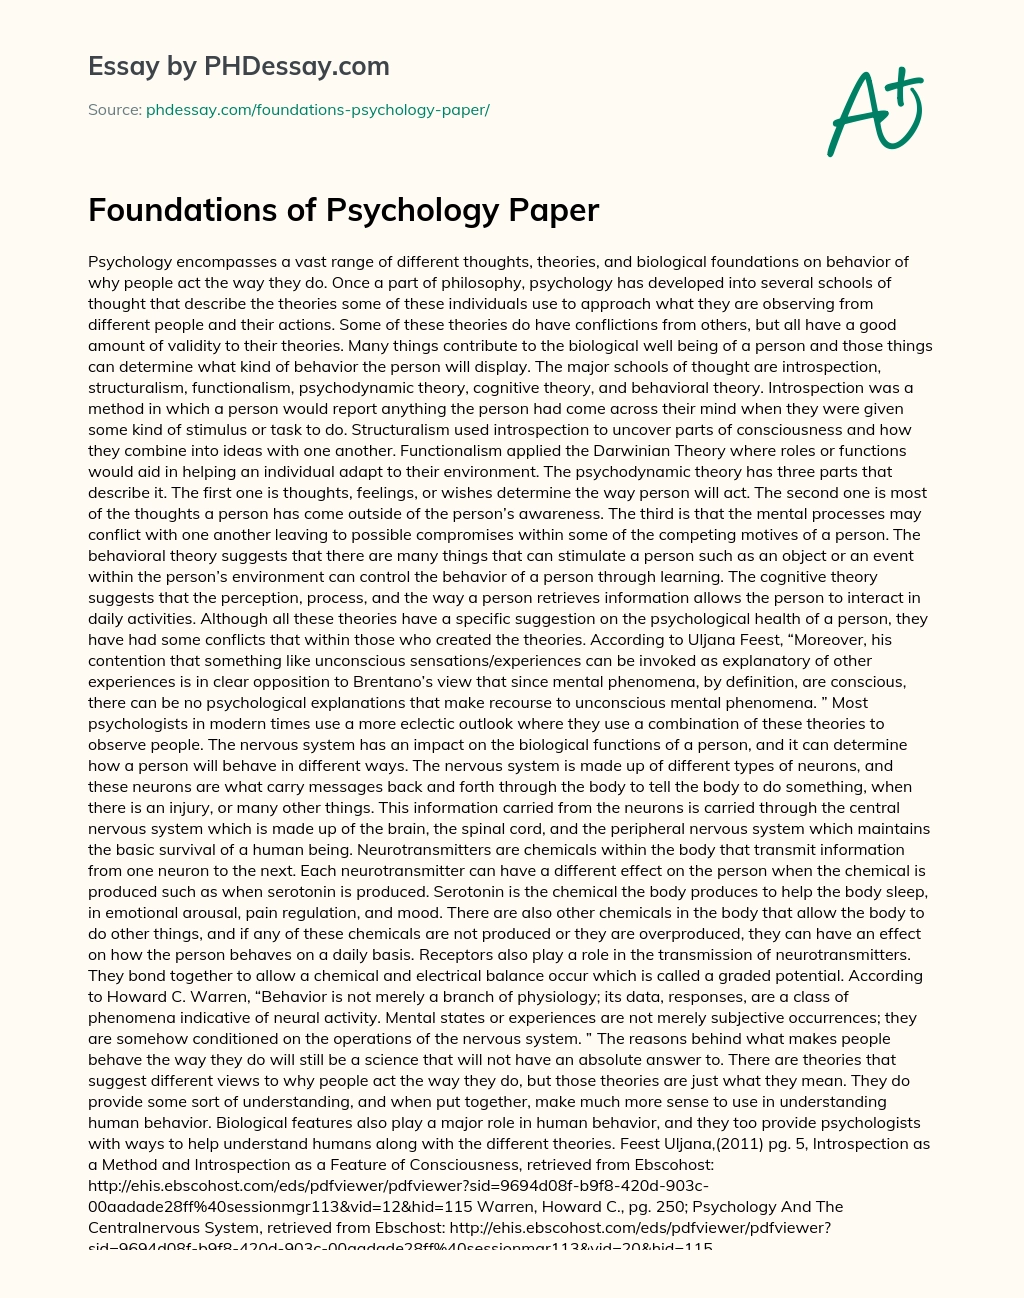 Foundations of Psychology Paper essay